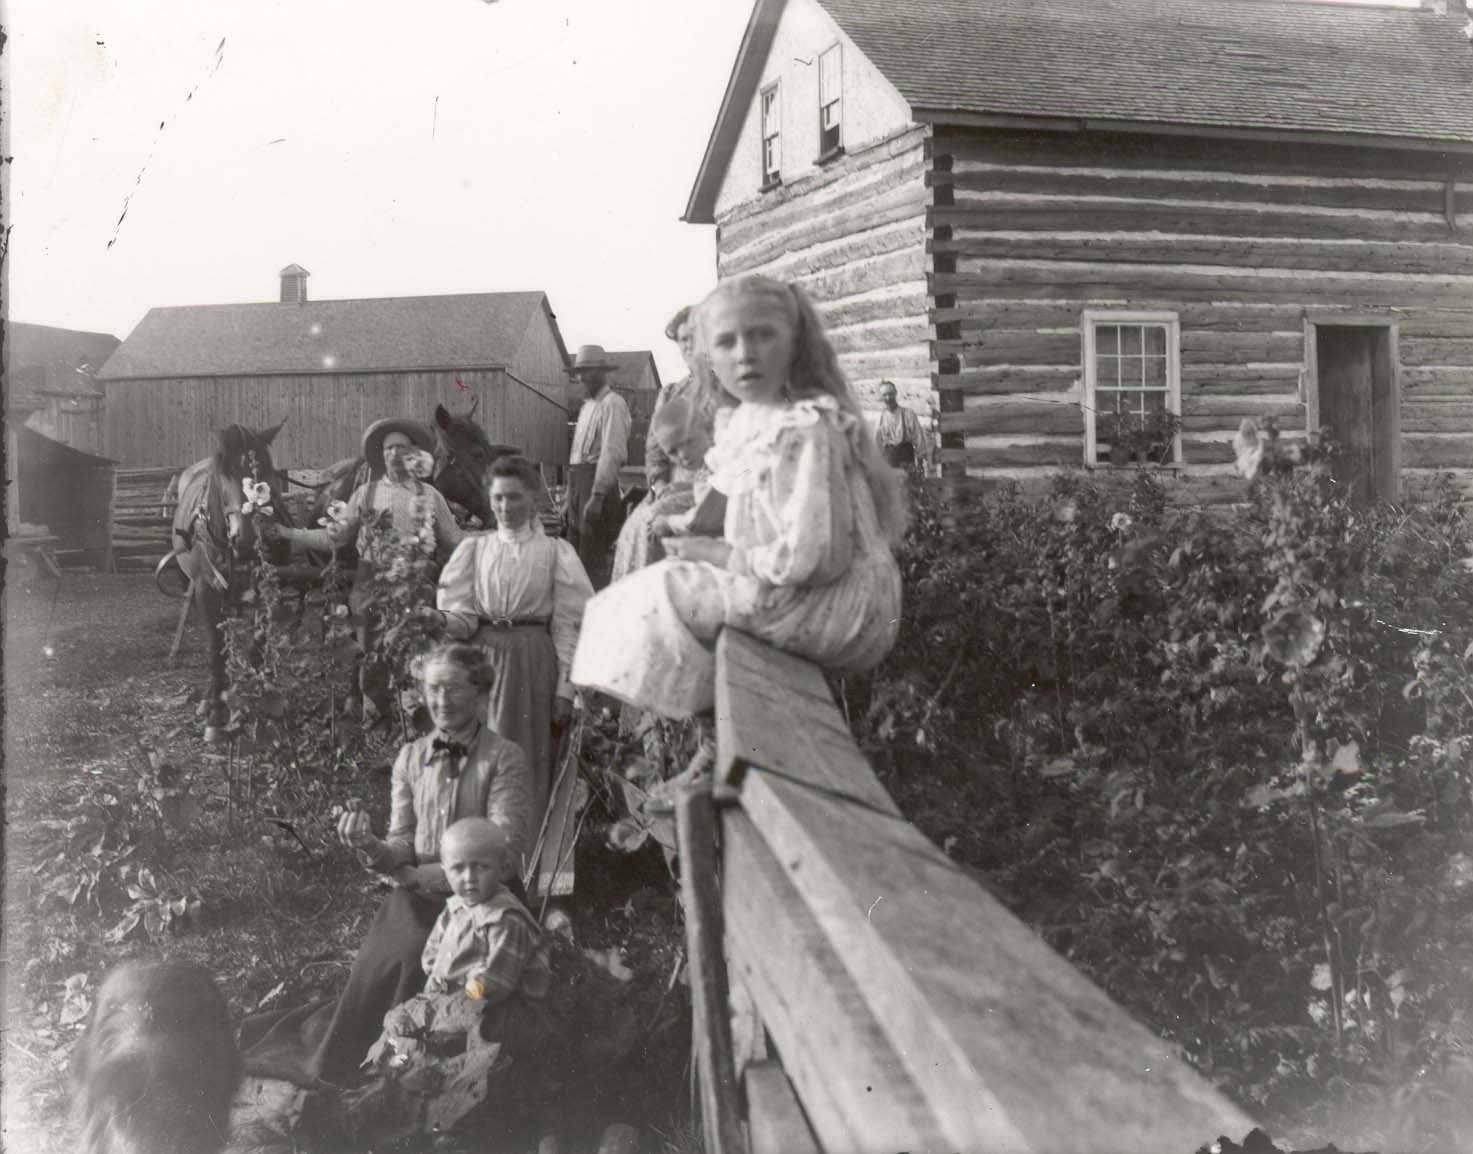 Unidentified%20family%20in%20front%20of%20log%20frame%20house%20and%20farm